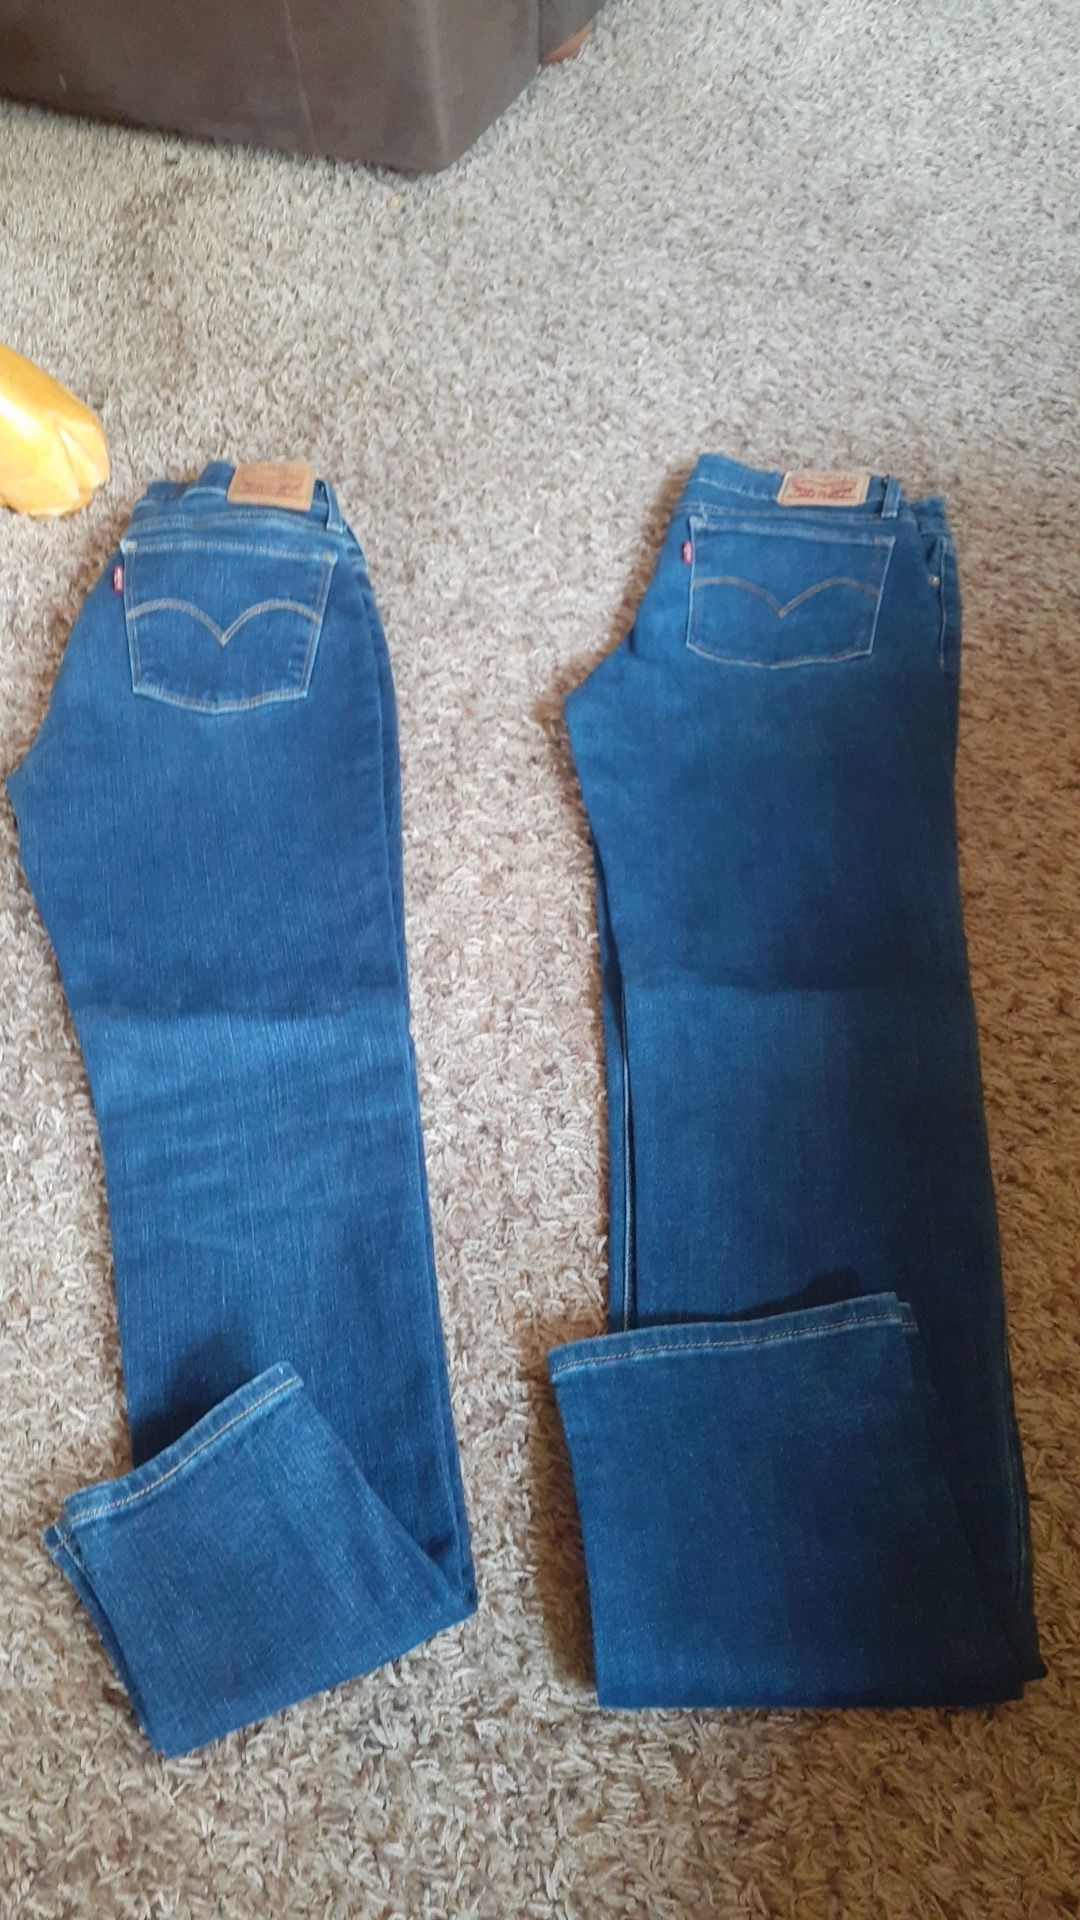 Levi's Skinny Jean's Both Size 29 $13 ea Pair on the left is SOLD